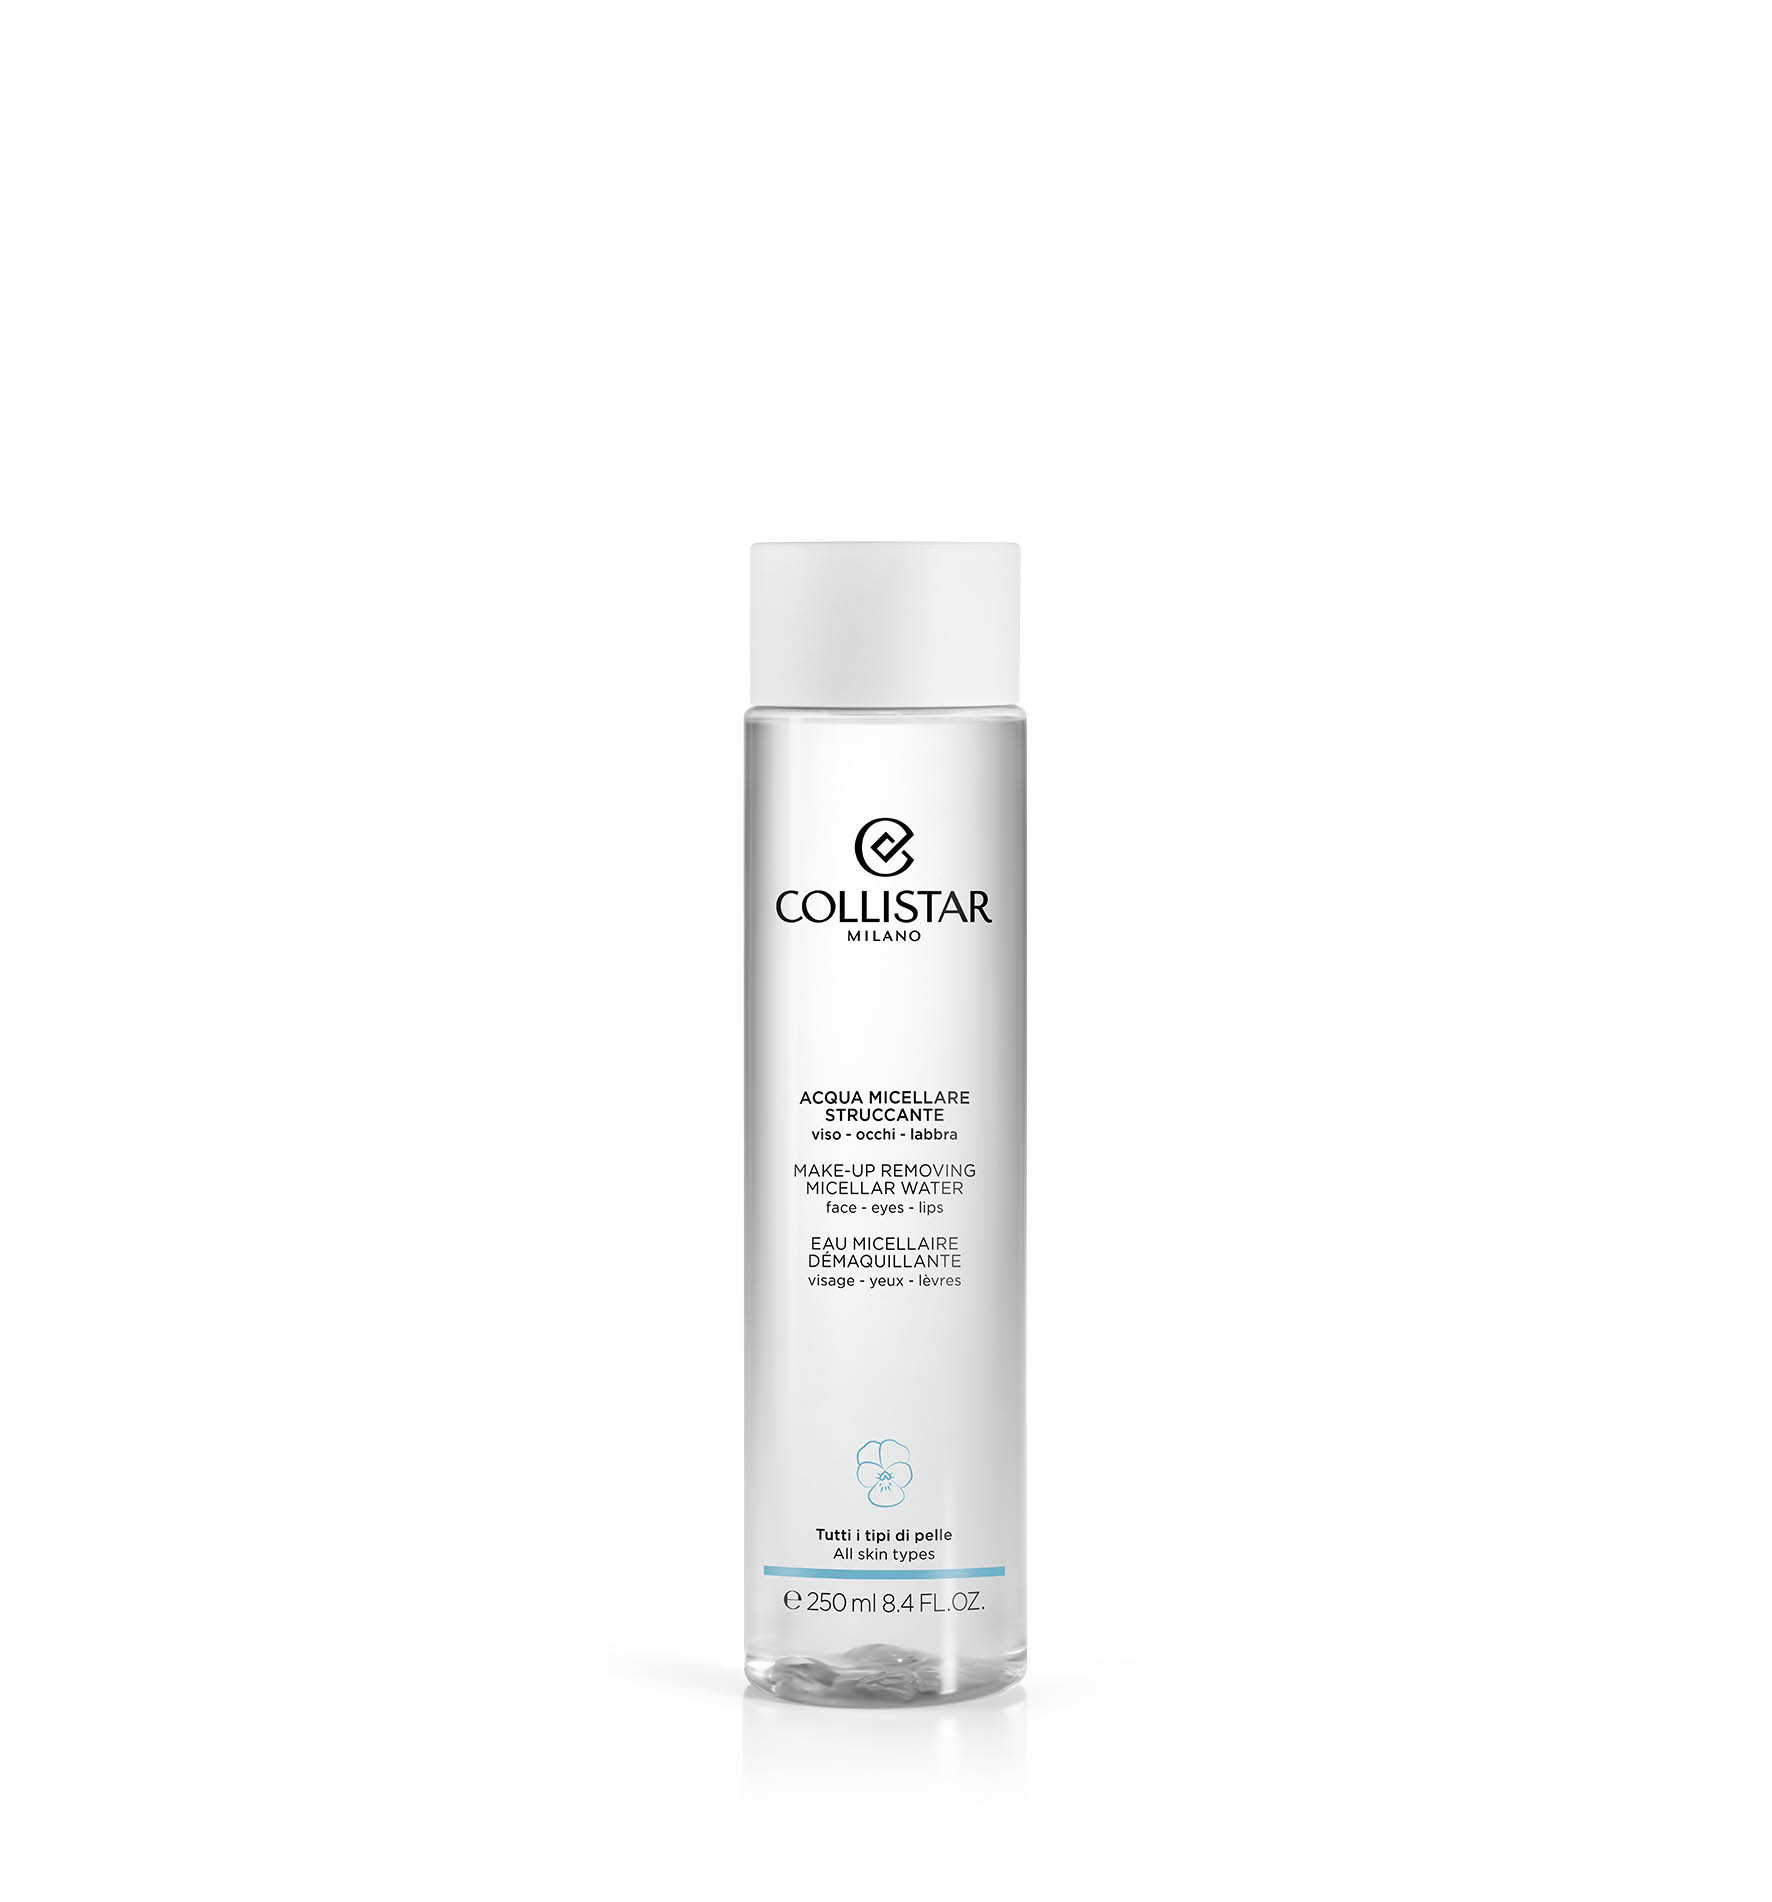 MAKE-UP REMOVING MICELLAR WATER FACE-EYES-LIPS | Collistar - Shop Online Ufficiale